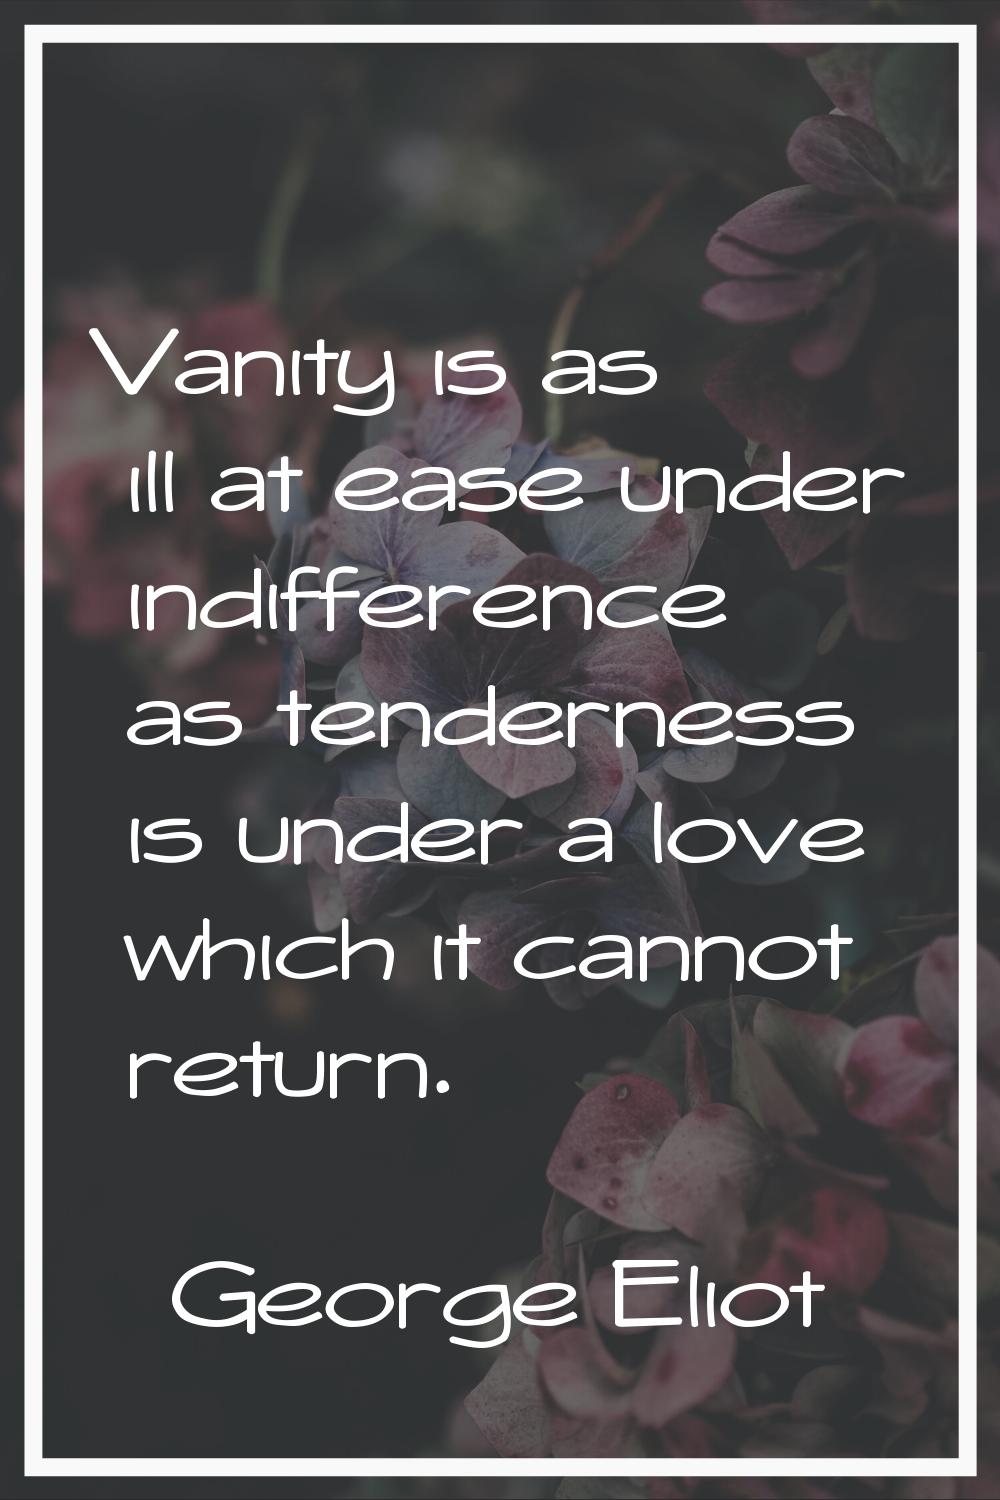 Vanity is as ill at ease under indifference as tenderness is under a love which it cannot return.